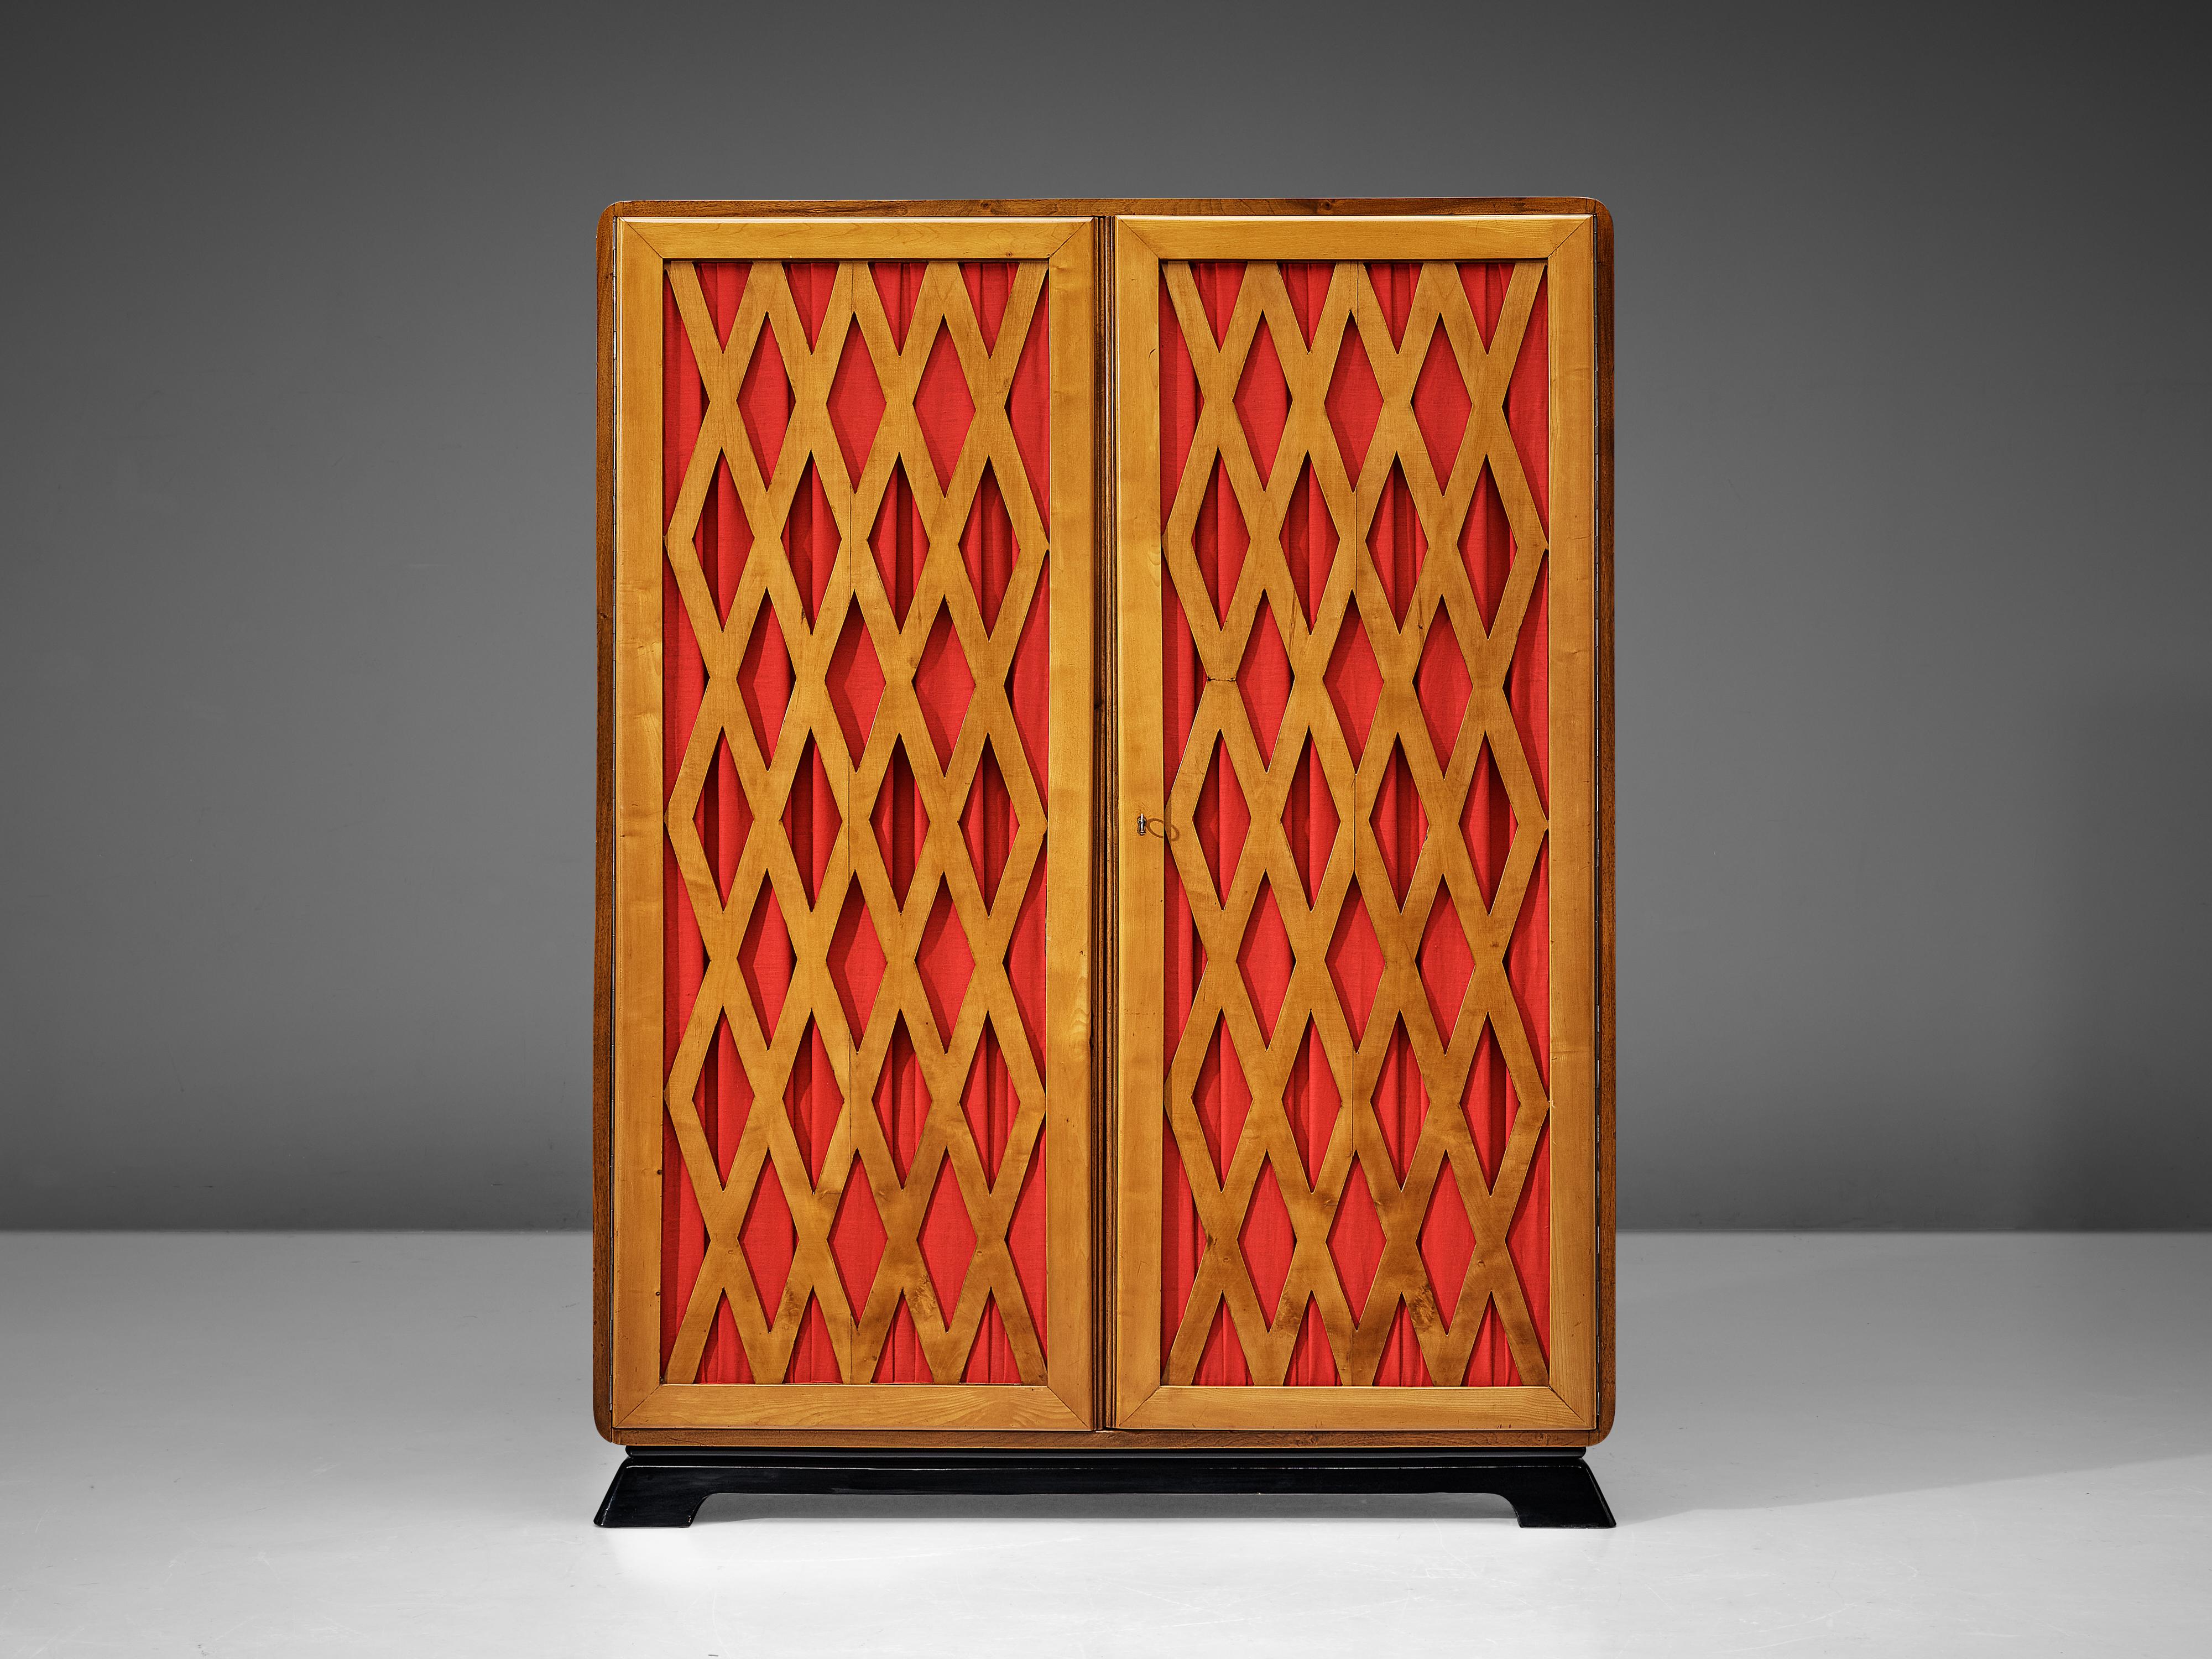 Wardrobe, walnut, fabric, Italy, 1930s. 

An elegant Art Deco wardrobe in walnut that features a checkered lattice frame in the doors. The open structure reveals a bright red fabric which creates a warm appearance in combination with the walnut. The